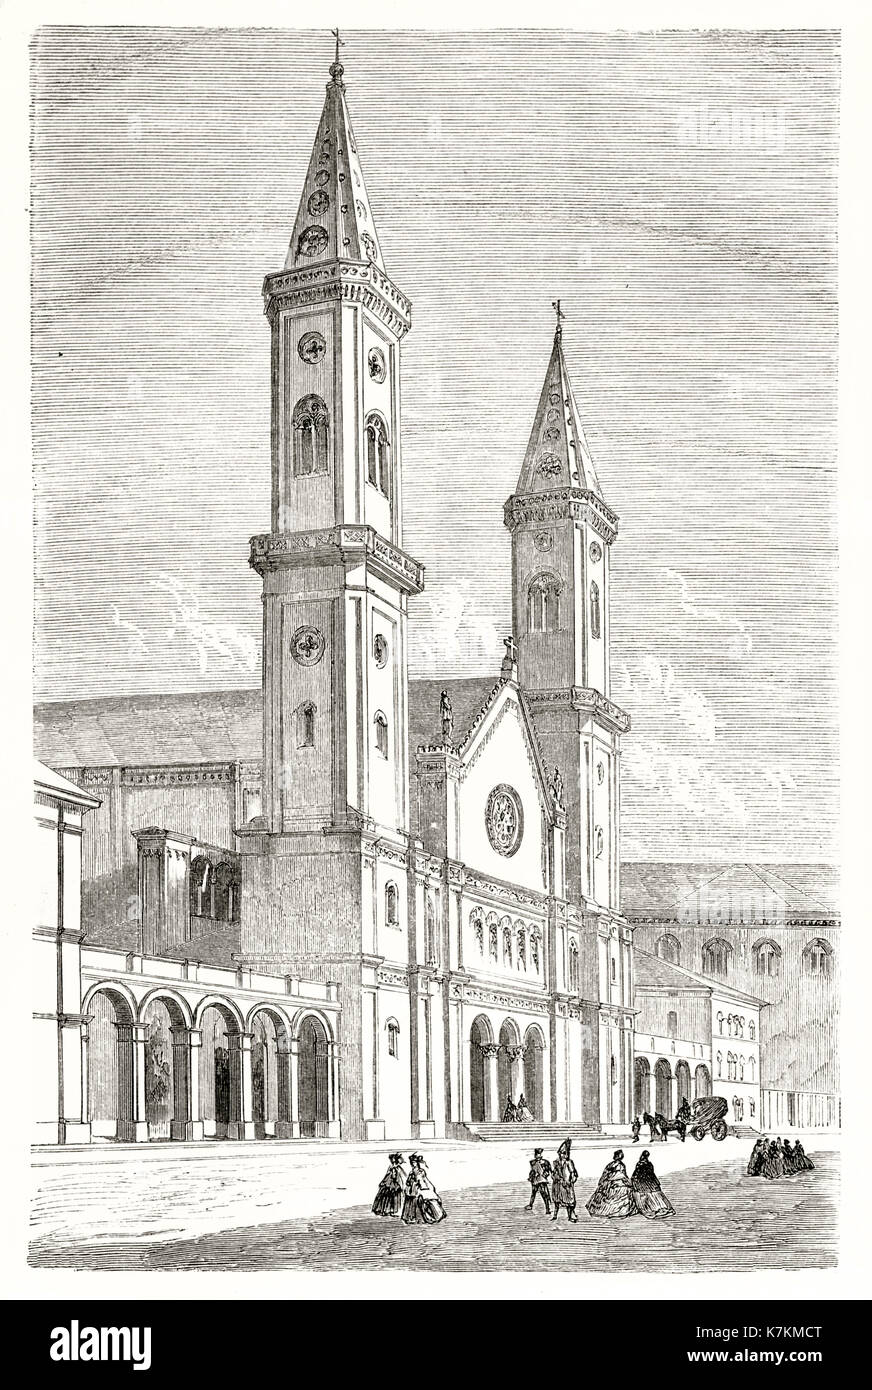 Old view of Ludwigskirche, Munich, Germany. By Lancelot and Laly, publ. on Le Tour du Monde, Paris, 1862 Stock Photo